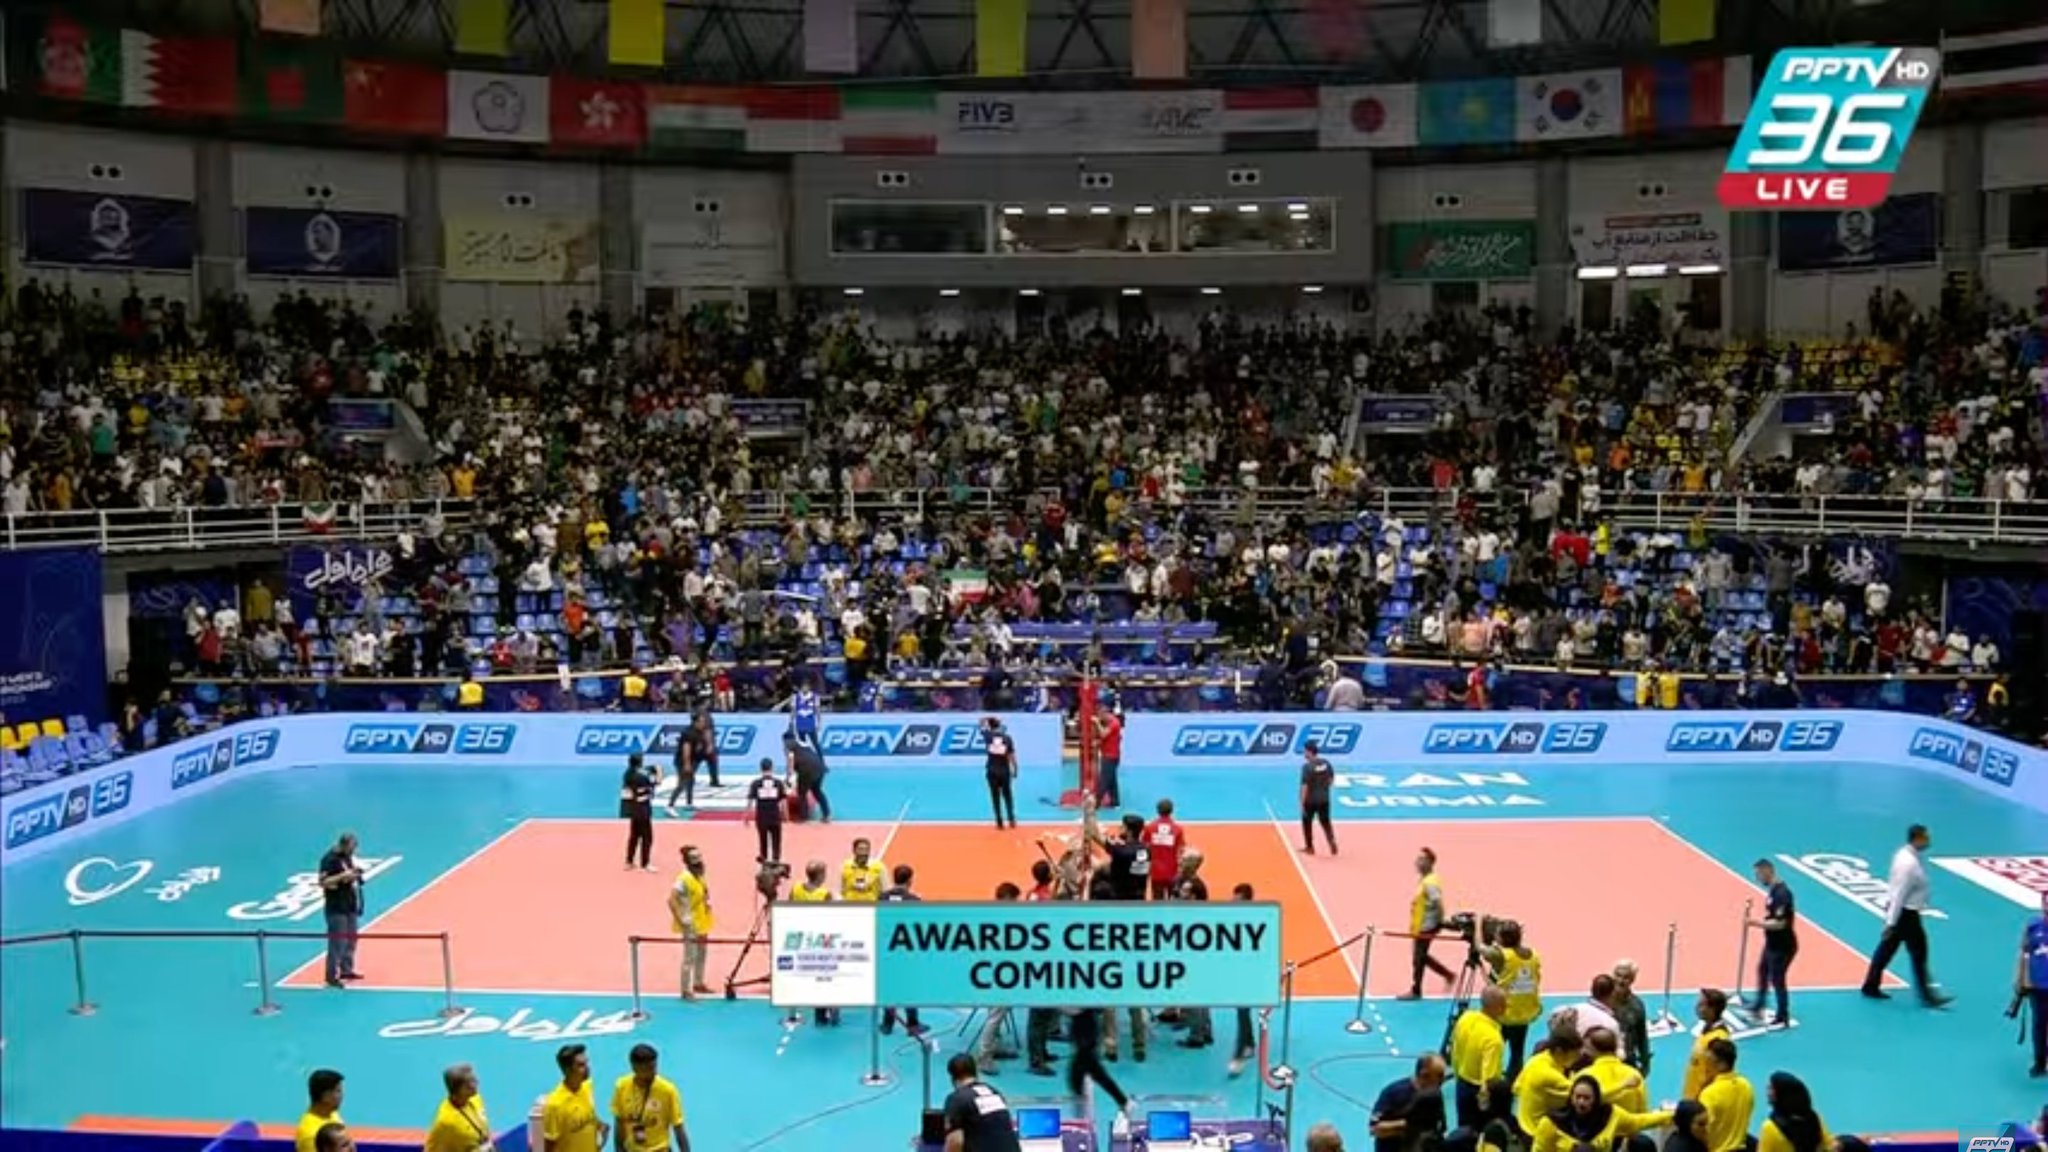 pptvhd36 volleyball live